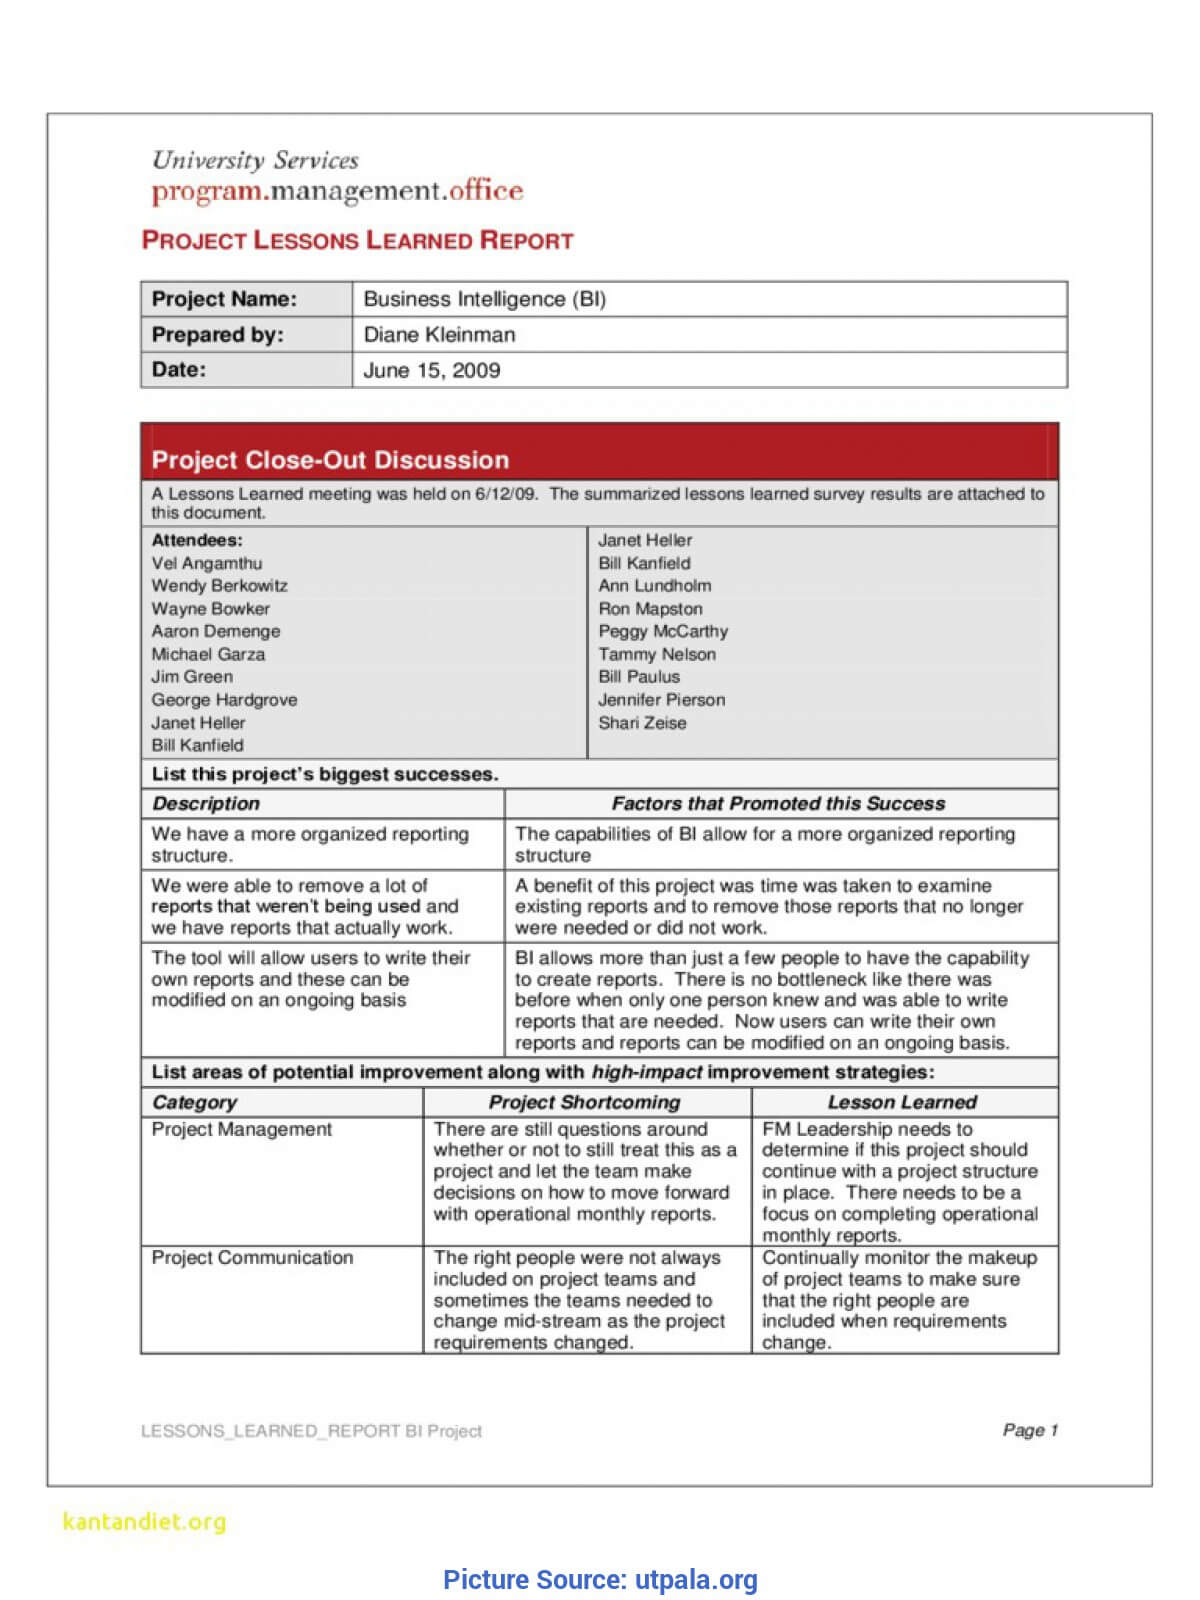 Trending Lessons Learned Document Management Lovely Lessons With Lessons Learnt Report Template